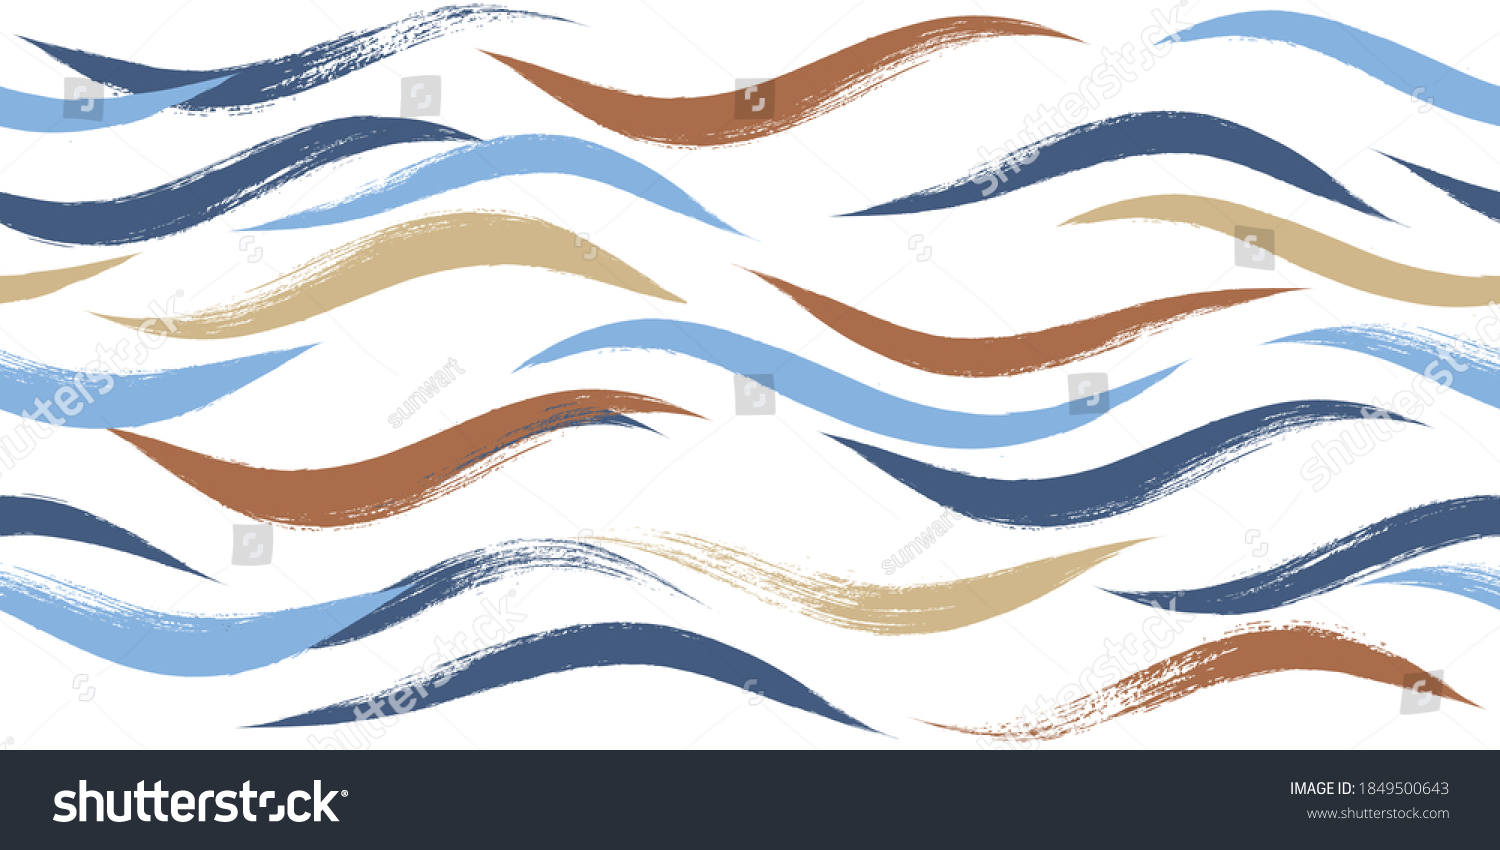 Seamless Wave Pattern Hand Drawn Water Stock Vector Royalty Free Shutterstock